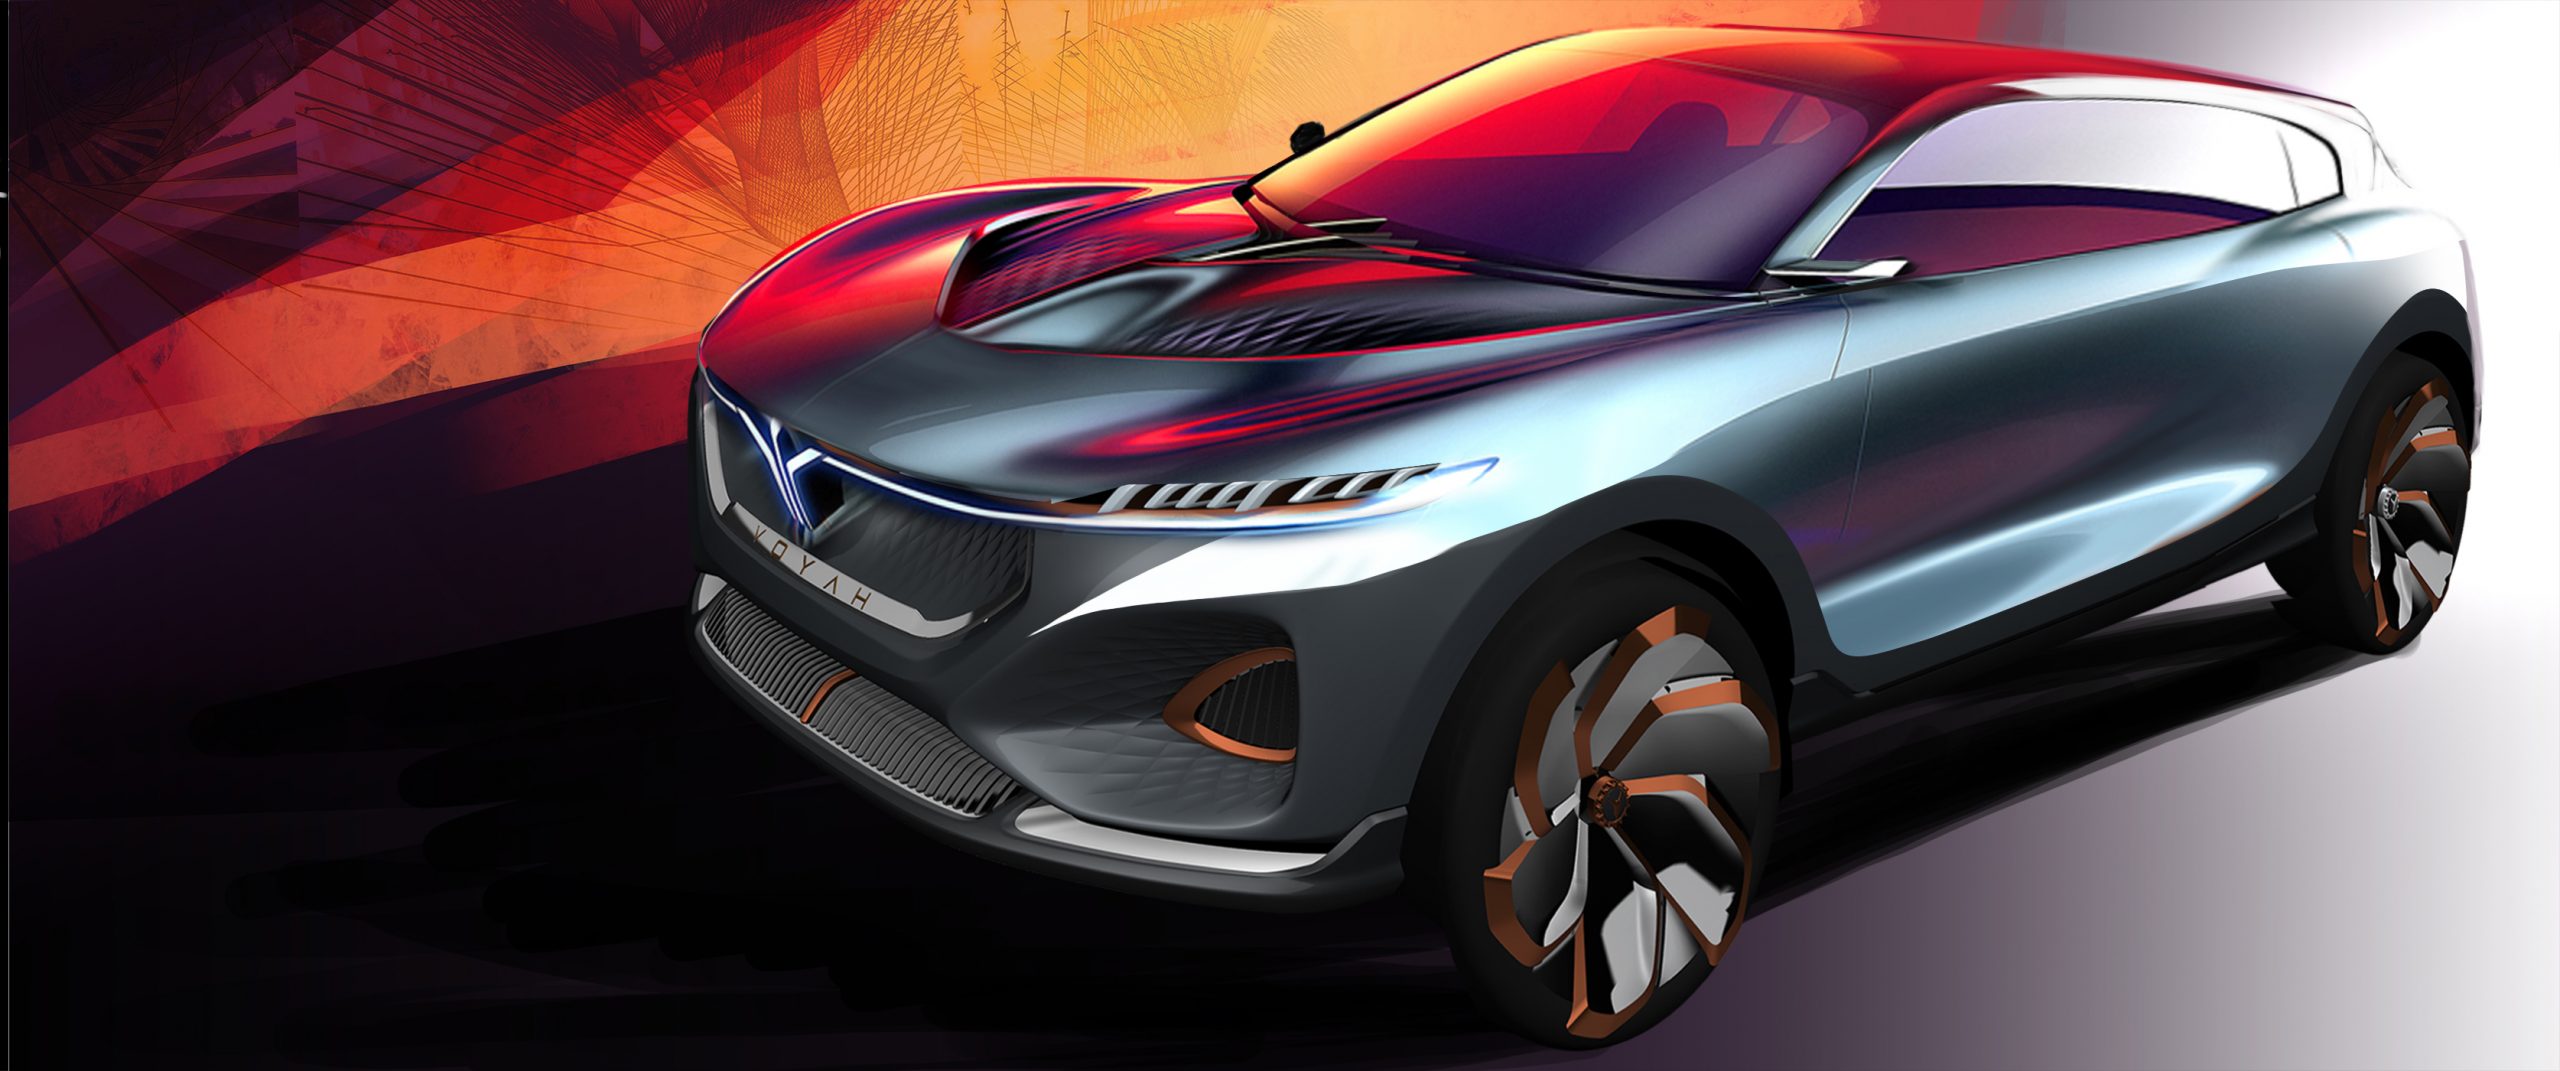 Lantu Automotive's first mass-produced concept car will debut at the Beijing Auto Show.